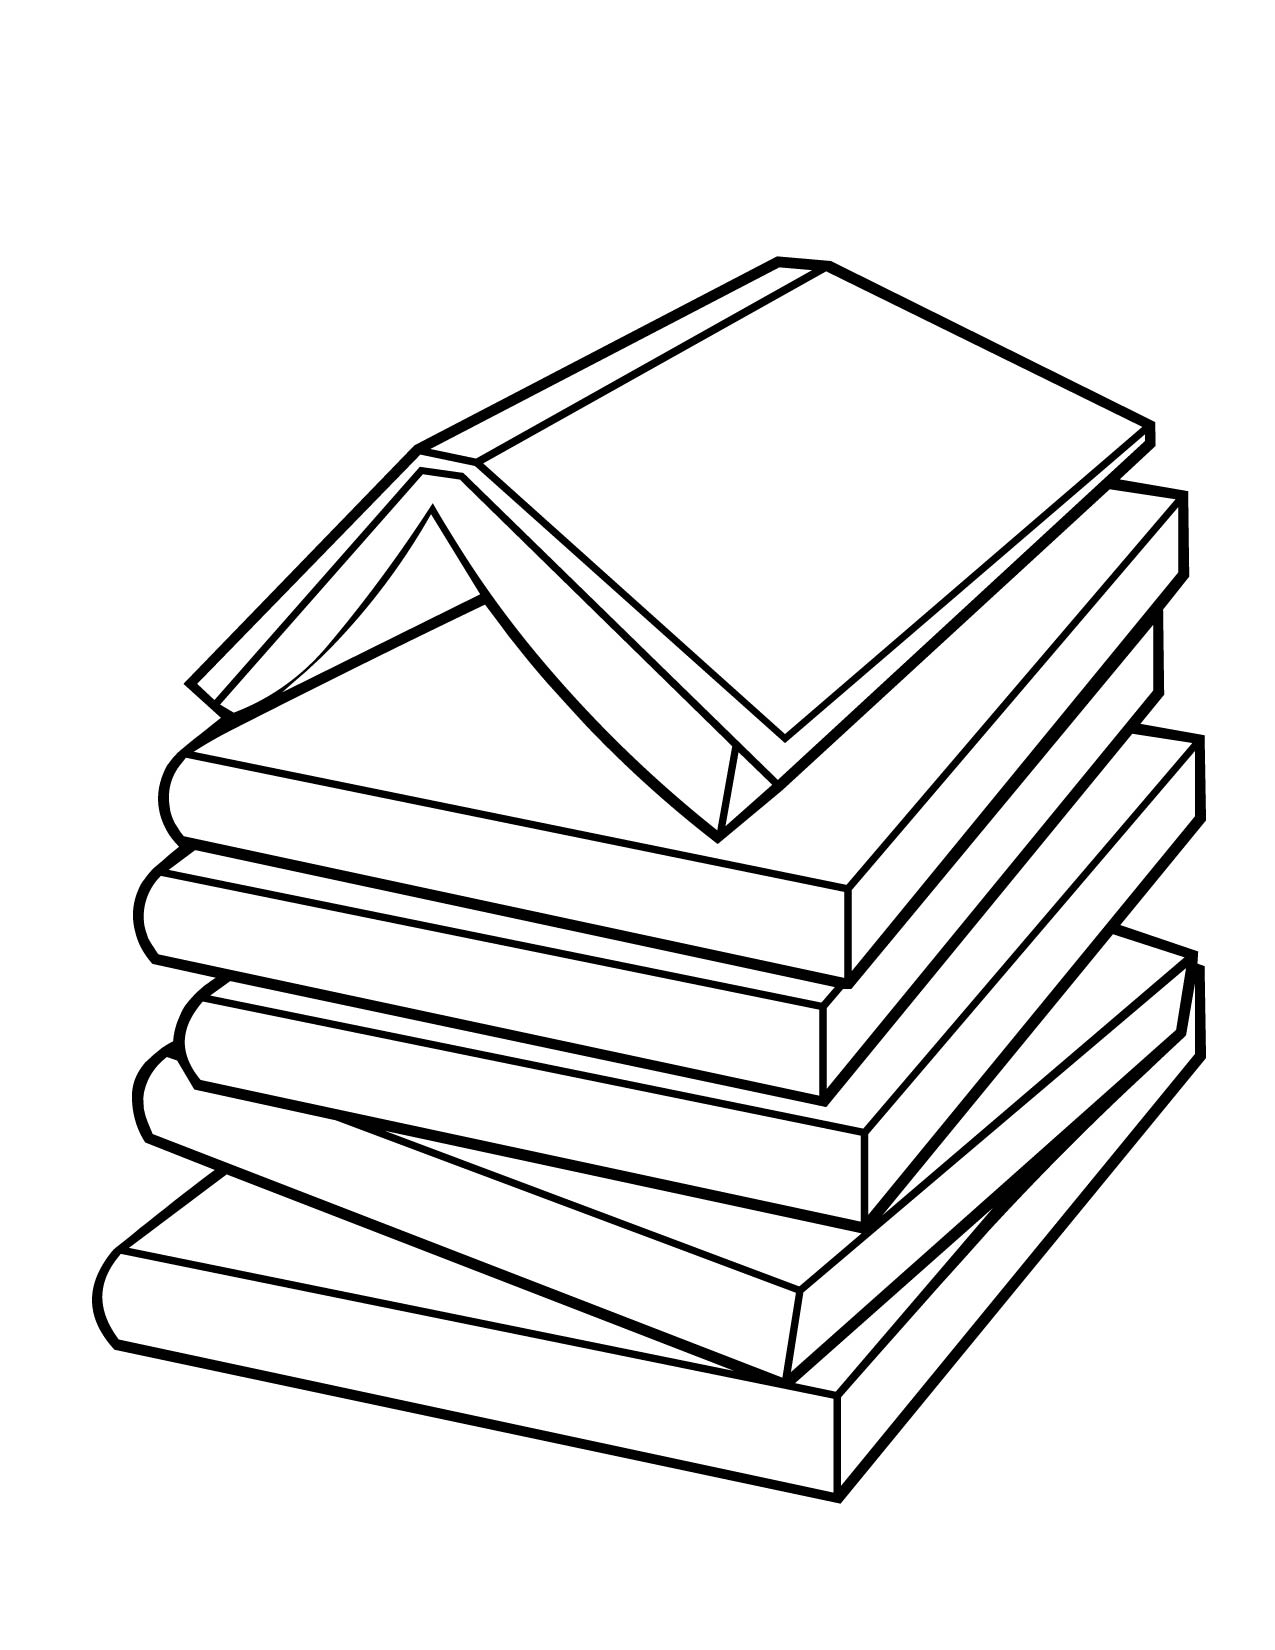 Coloring Pages About Books